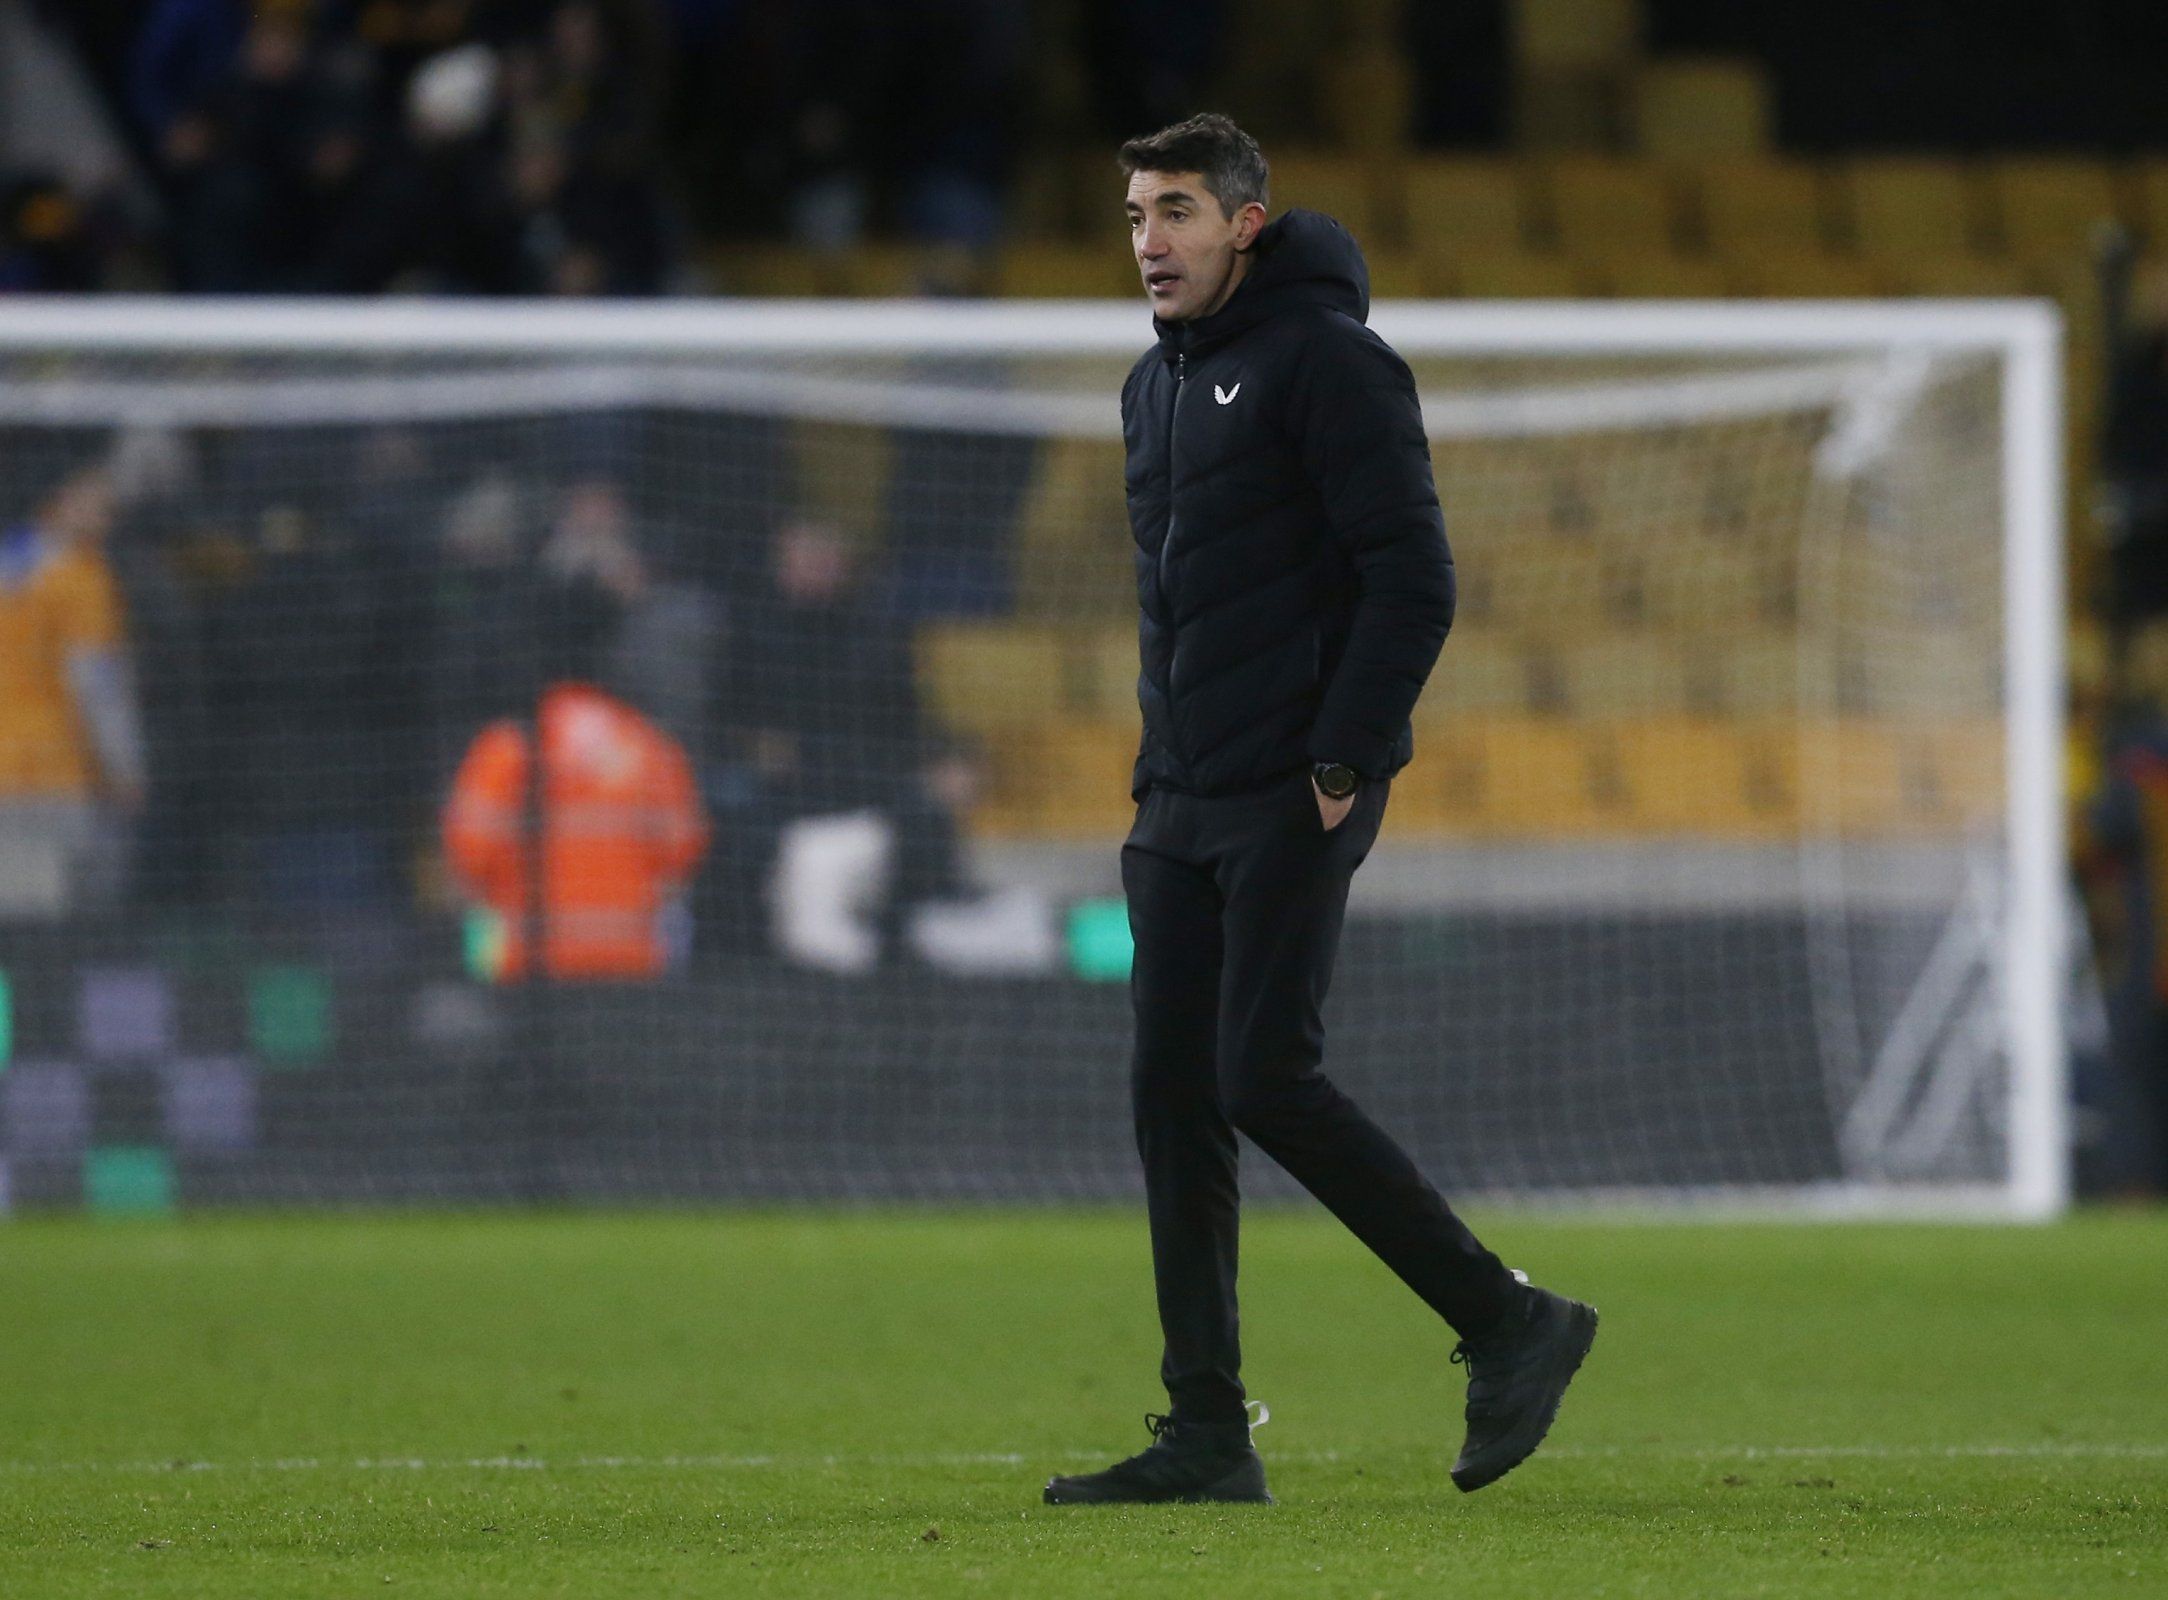 Bruno Lage, Fosun, Jeff Shi, Molineux, The Old Gold, Wolves, Wolves fans, Wolves info, Wolves latest, Wolves news, Wolves updates, WWFC, WWFC news, WWFC update, Premier League, Premier League news, Wolverhampton Wanderers, Wolves transfer news, January transfer window, Yerson Mosquera, Wolves injury news, Wolves injury update, 
